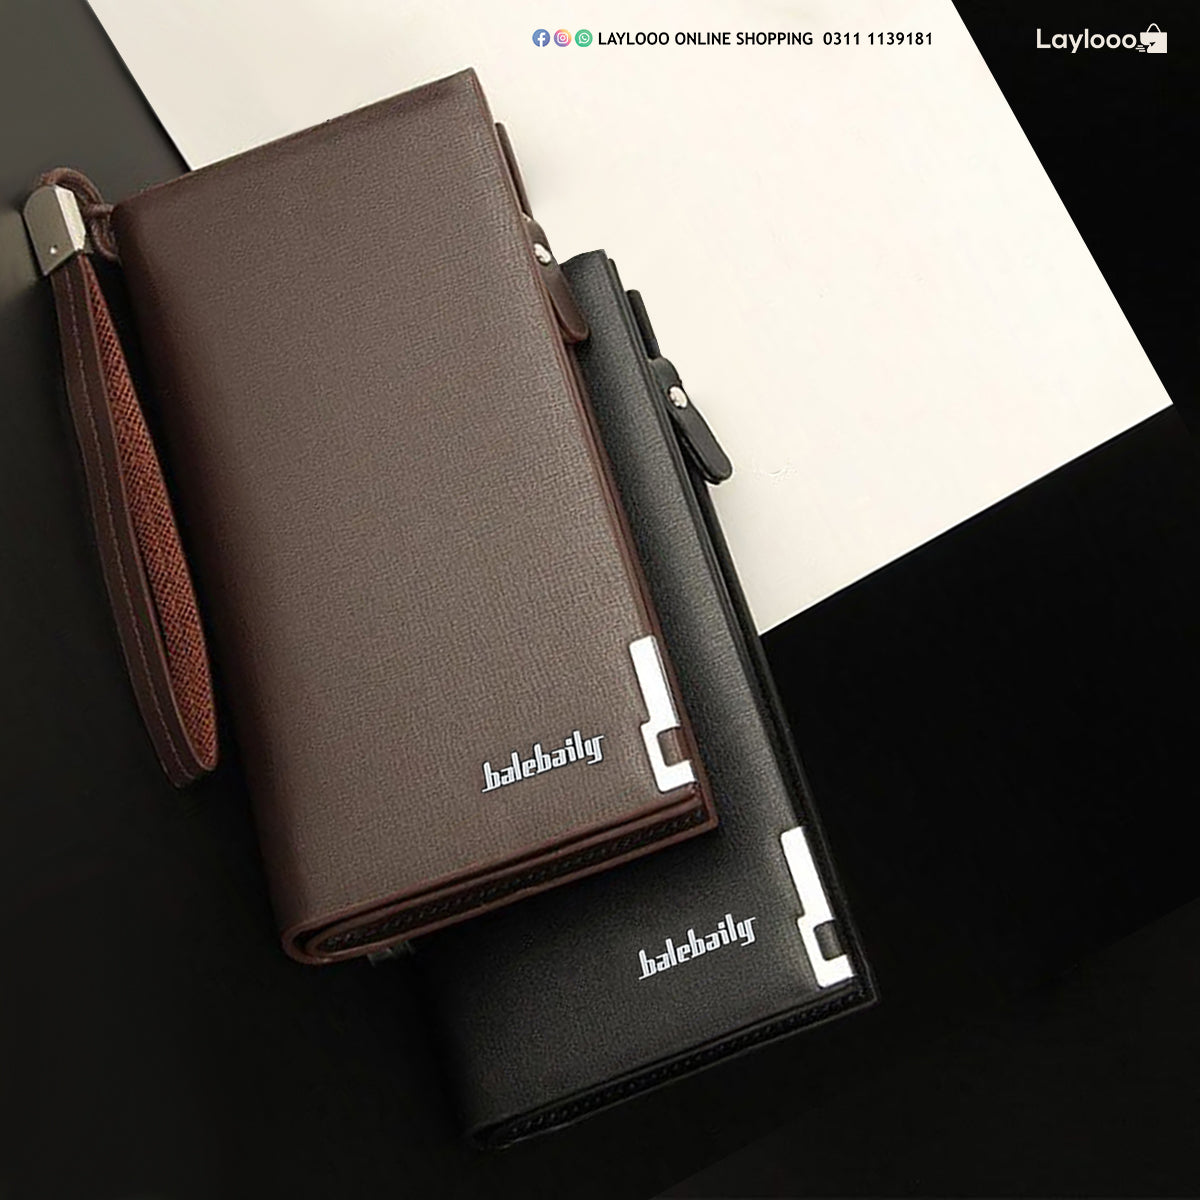 Bailbaily Leather Mobile and Business Wallet Black